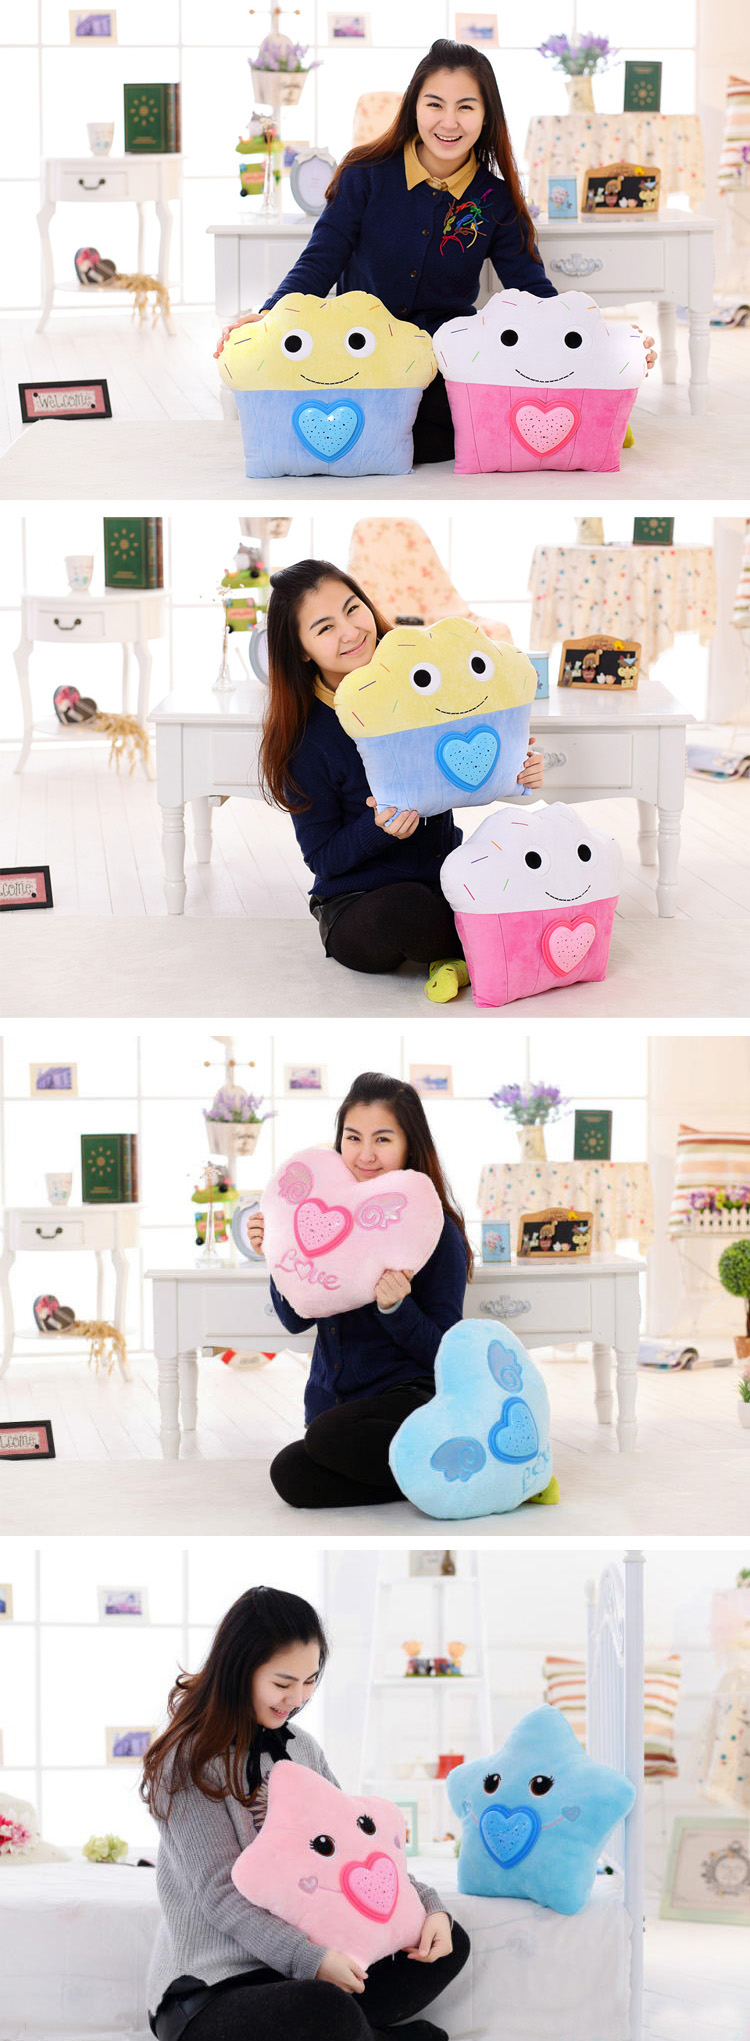 Colorful-Plush-LED-Music-Projection-Star-Cake-Heart-Shape-Throw-Pillow-Home-Sofa-Decor-Valentine-Gif-1023125-4